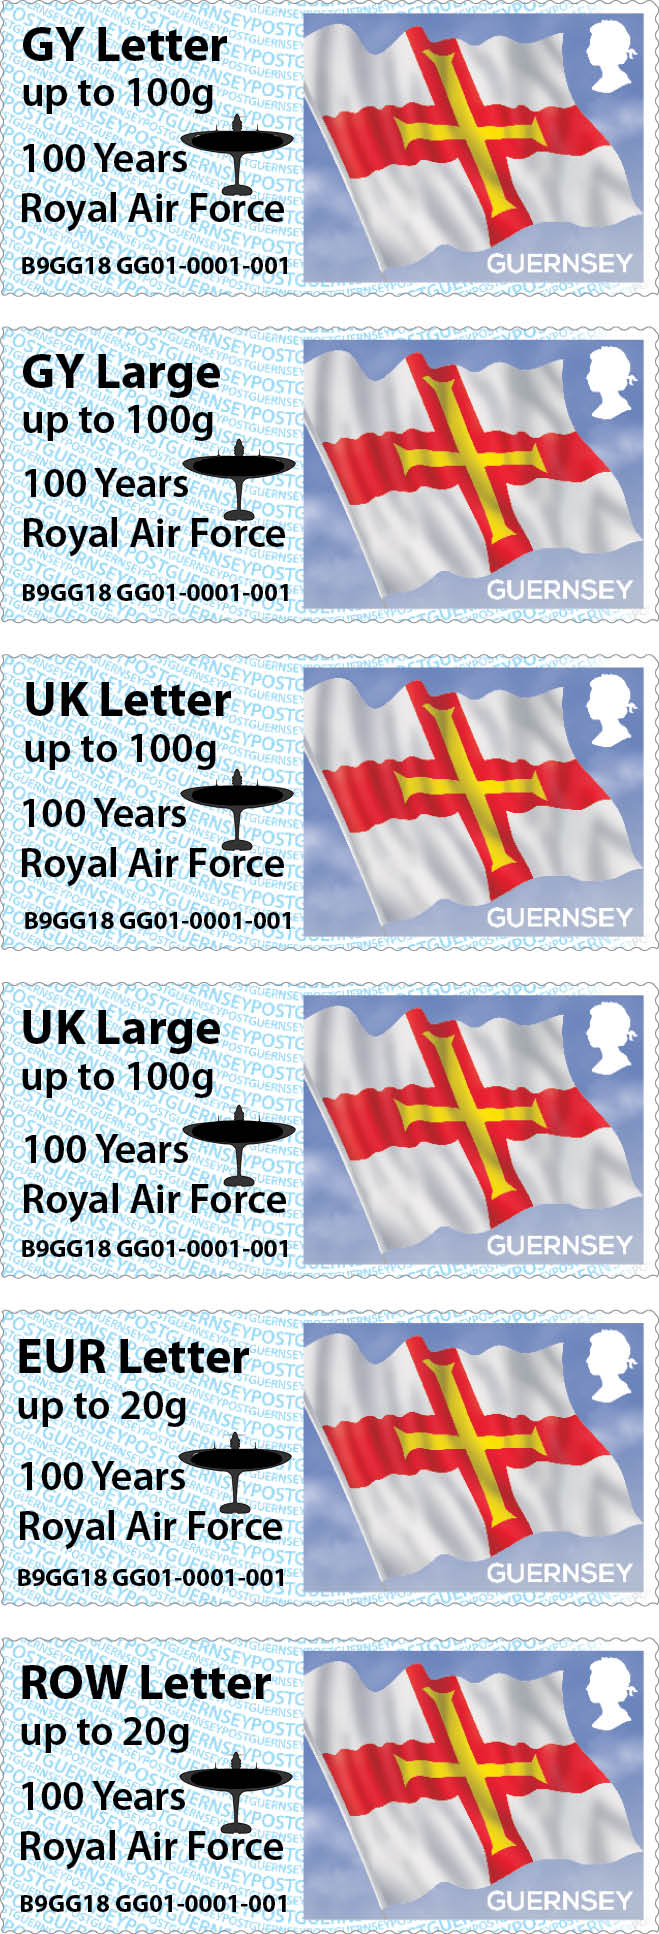 RAF Overprint for Guernsey's Post & Go at Autumn Stampex